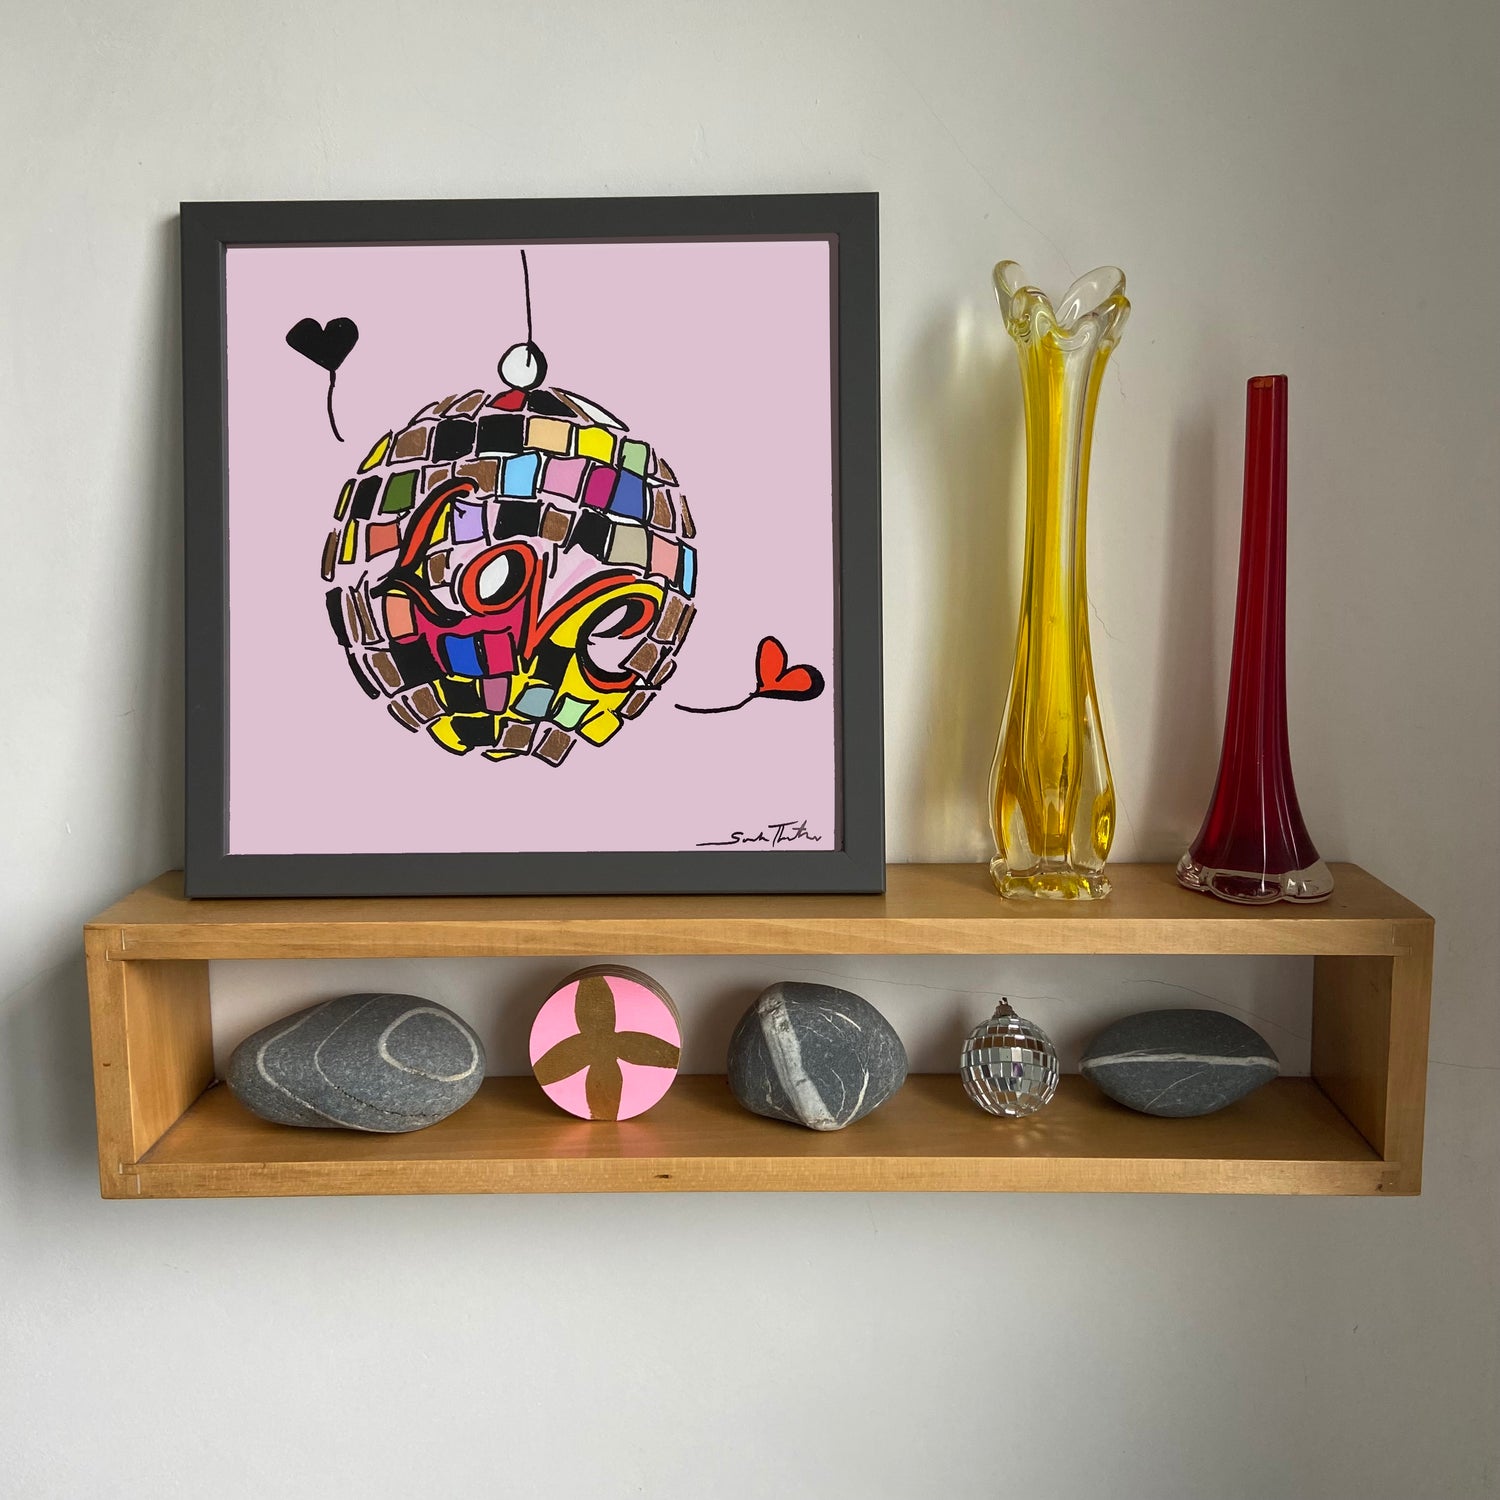 You Got The Love discoball art featuring the word love in red, a cartoon pop art illustration with a pale pink background with two love hearts